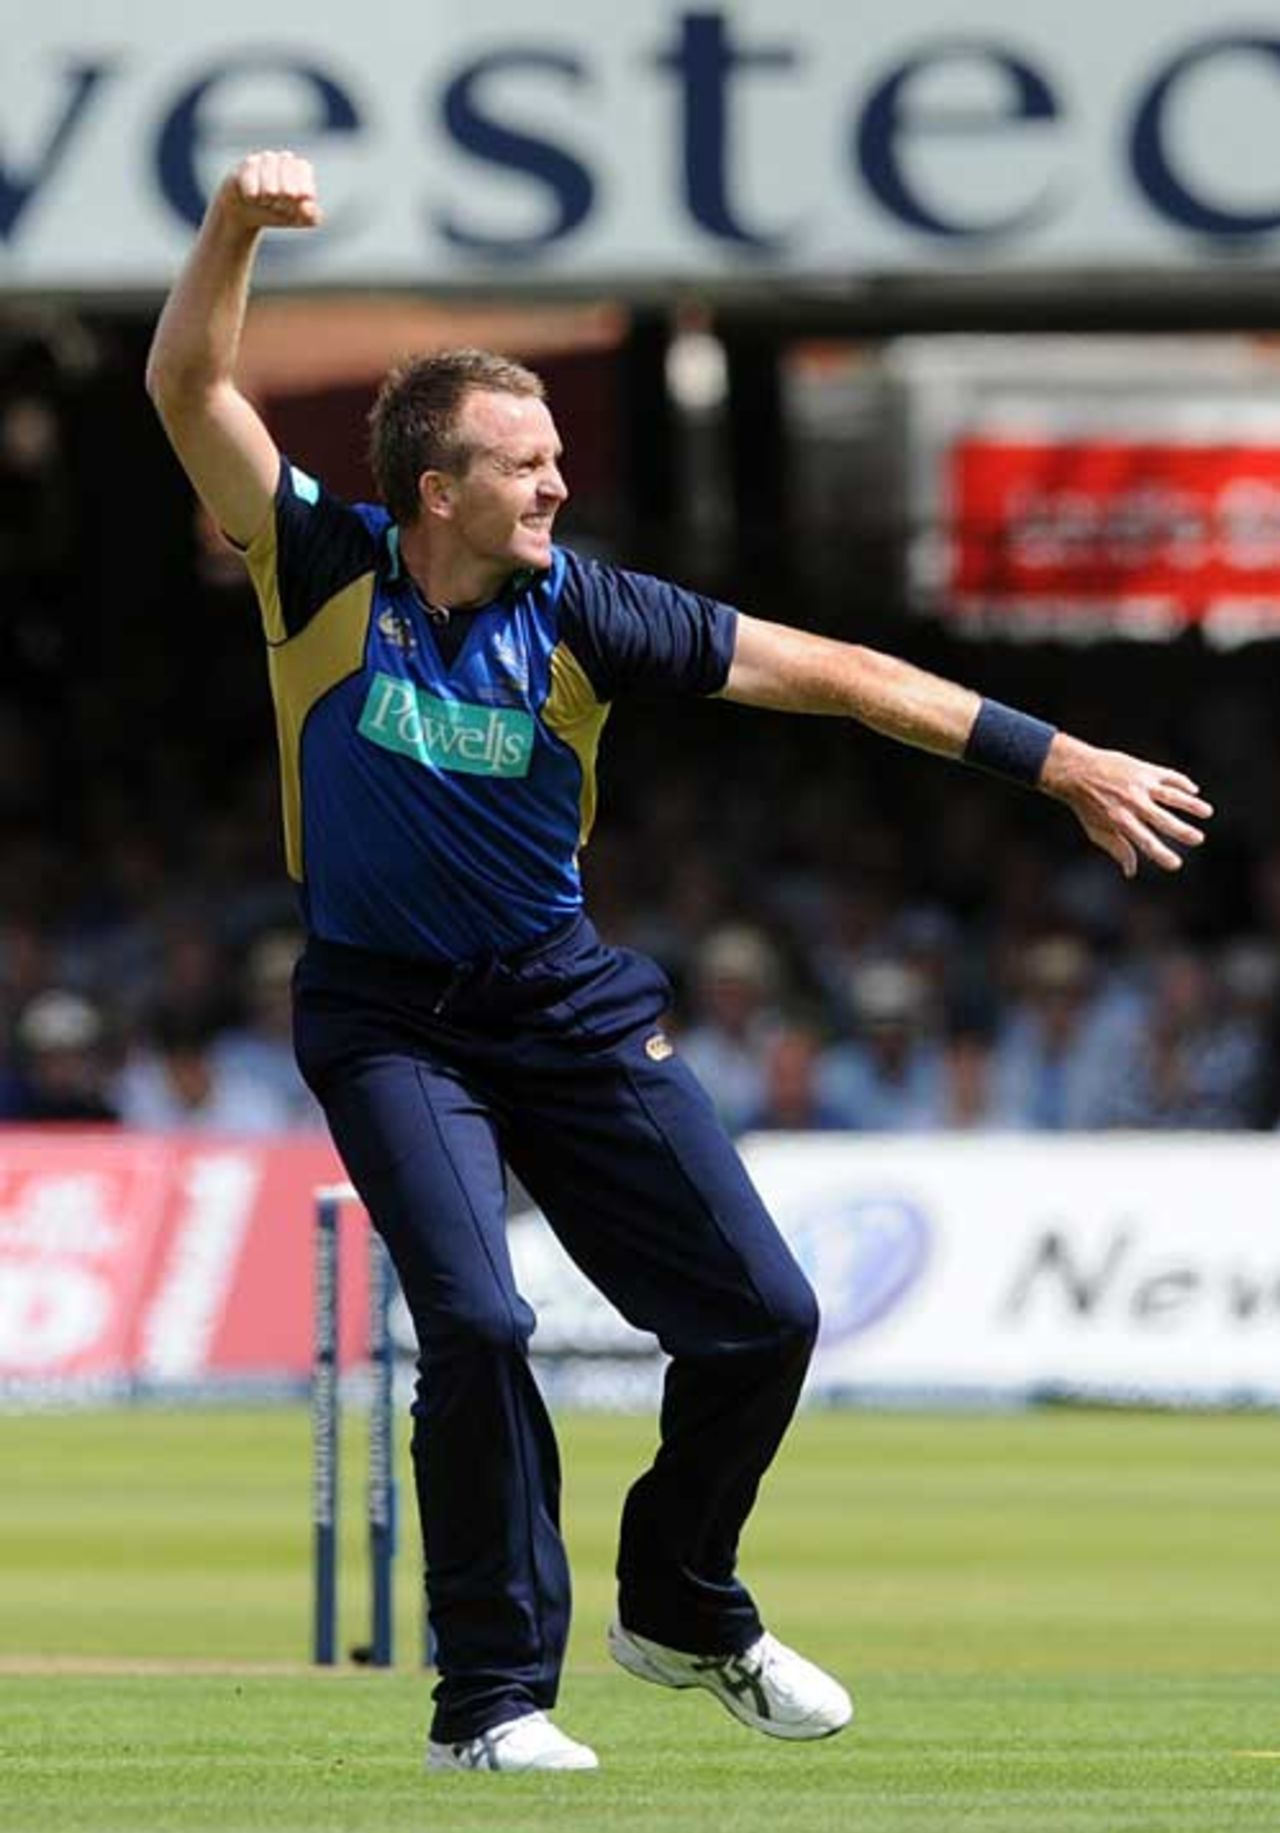 A pumped up Dominic Cork took three early wickets, Hampshire v Sussex, Friends Provident Trophy final, Lord's, July 25, 2009